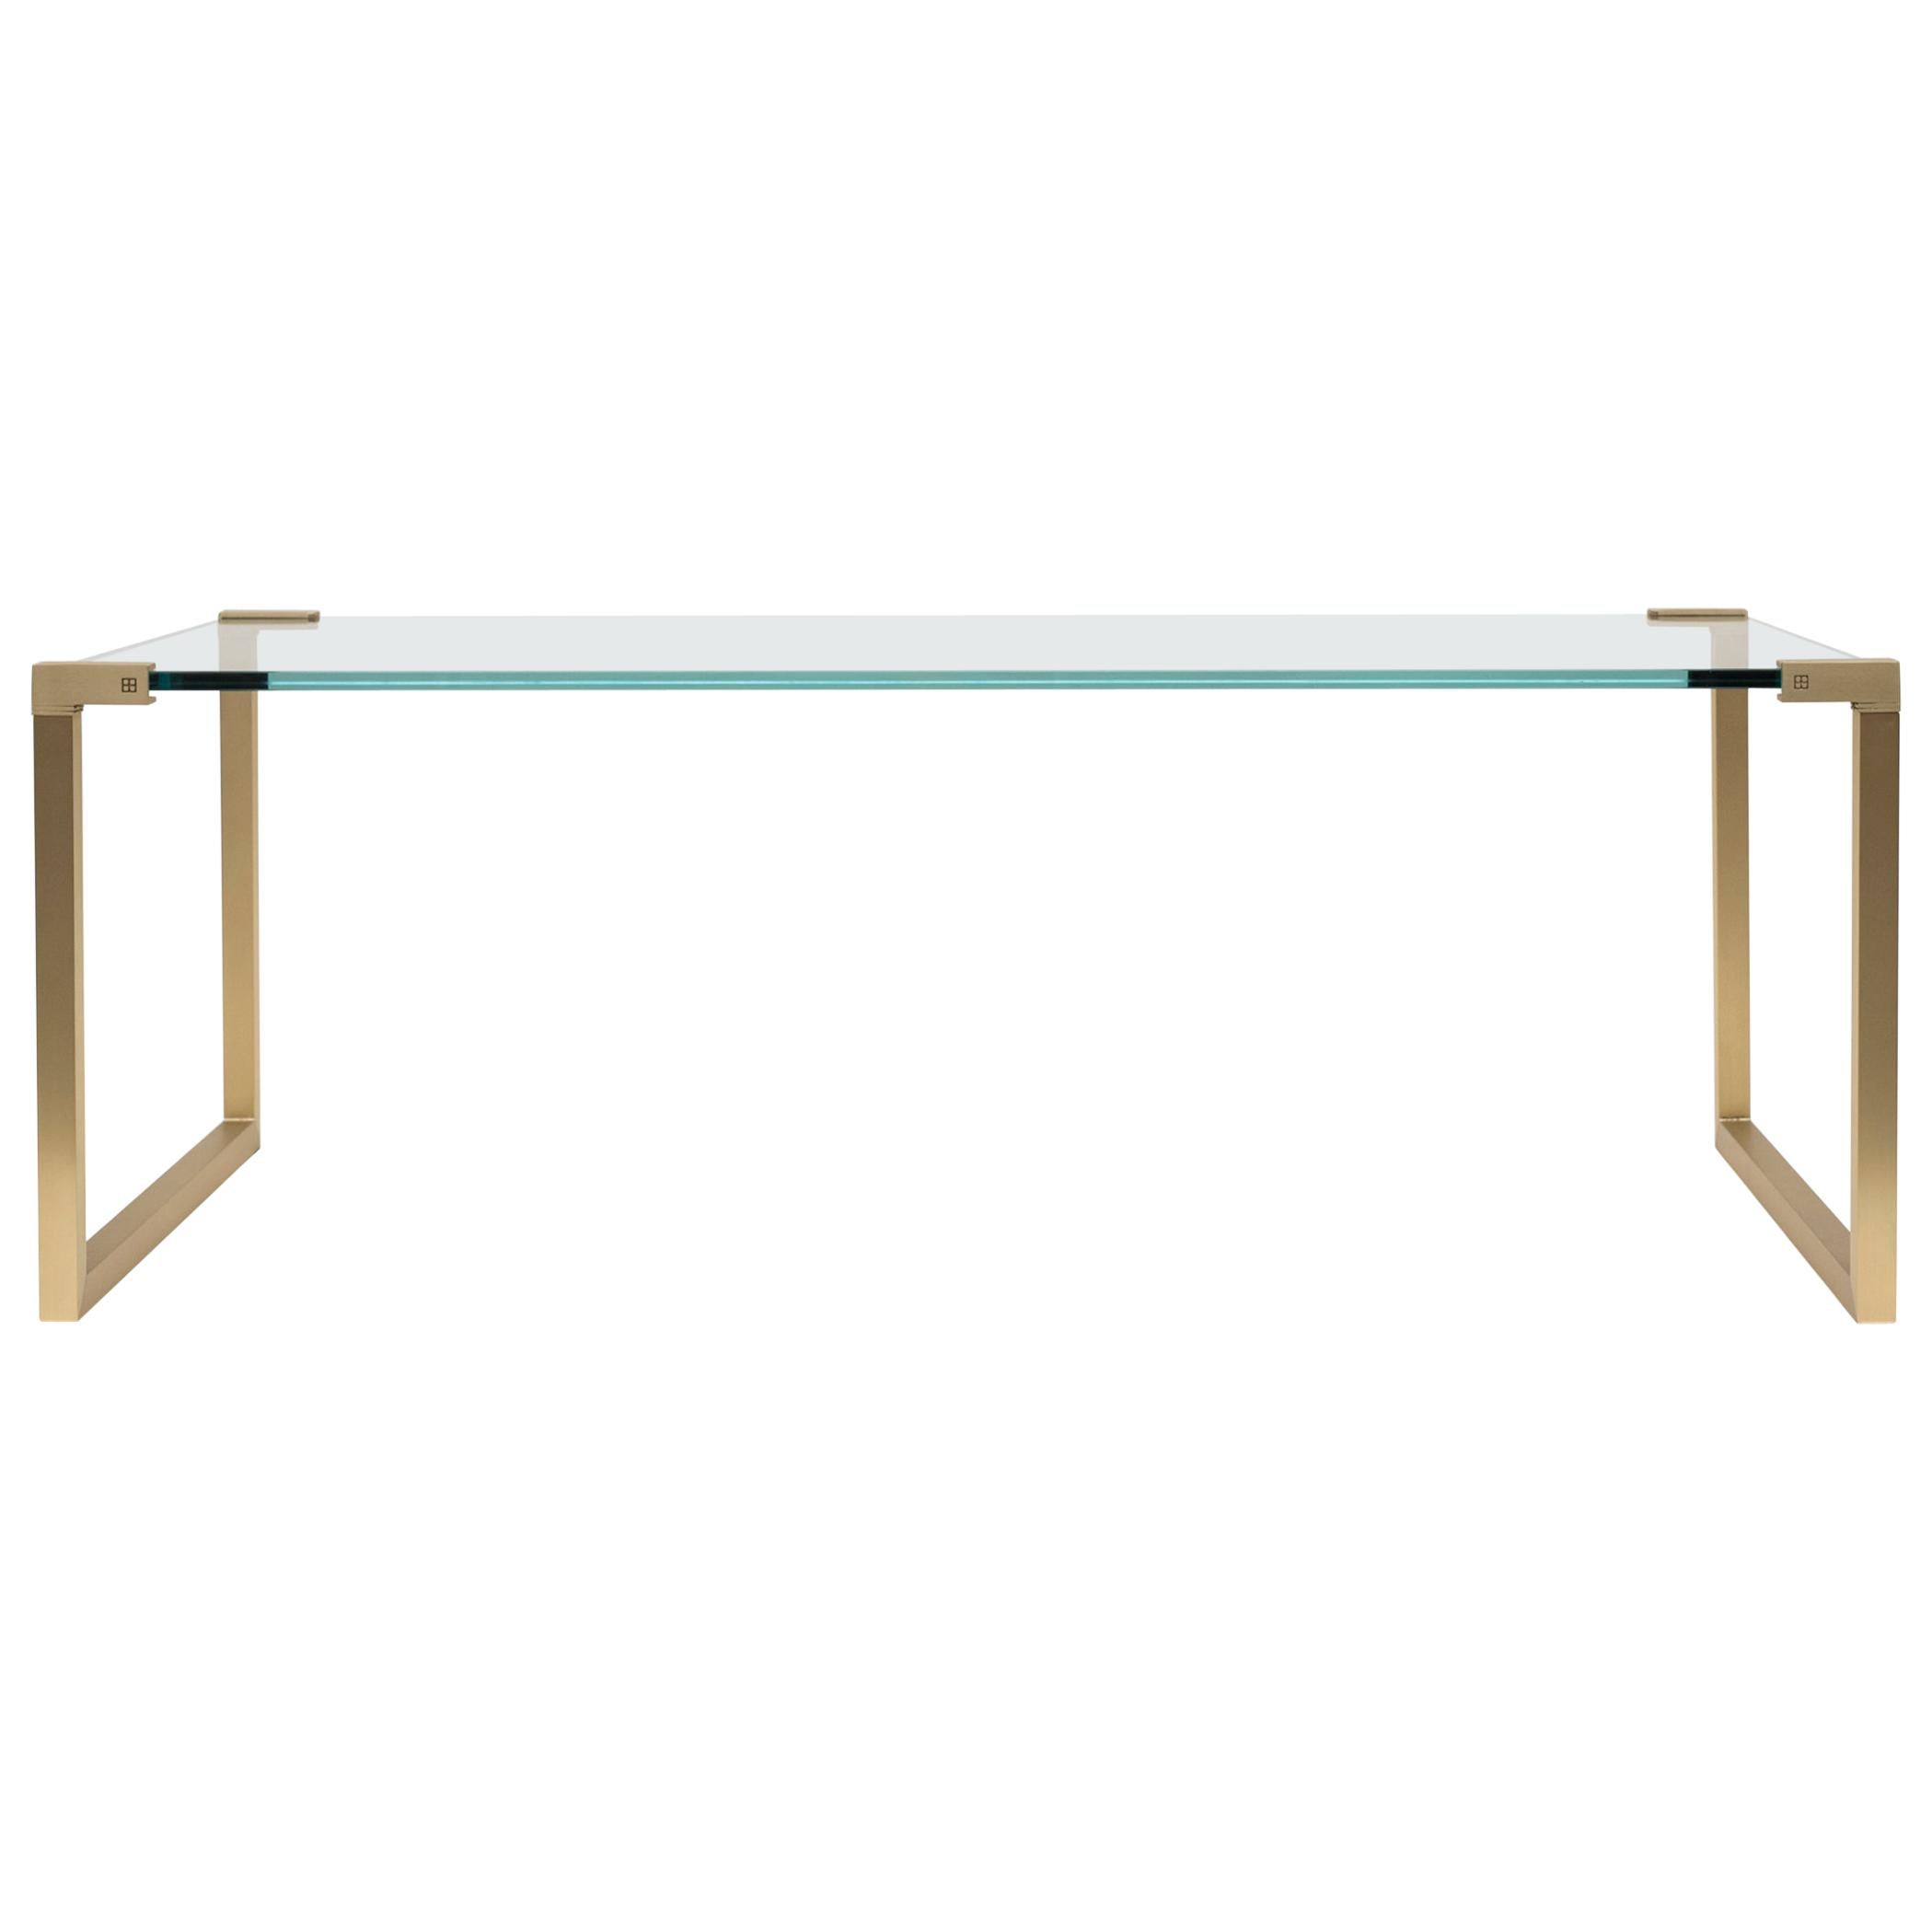 Peter Ghyczy Coffee Table Pioneer T53 Brass Matt / Optiwhite Glass Minimal Style